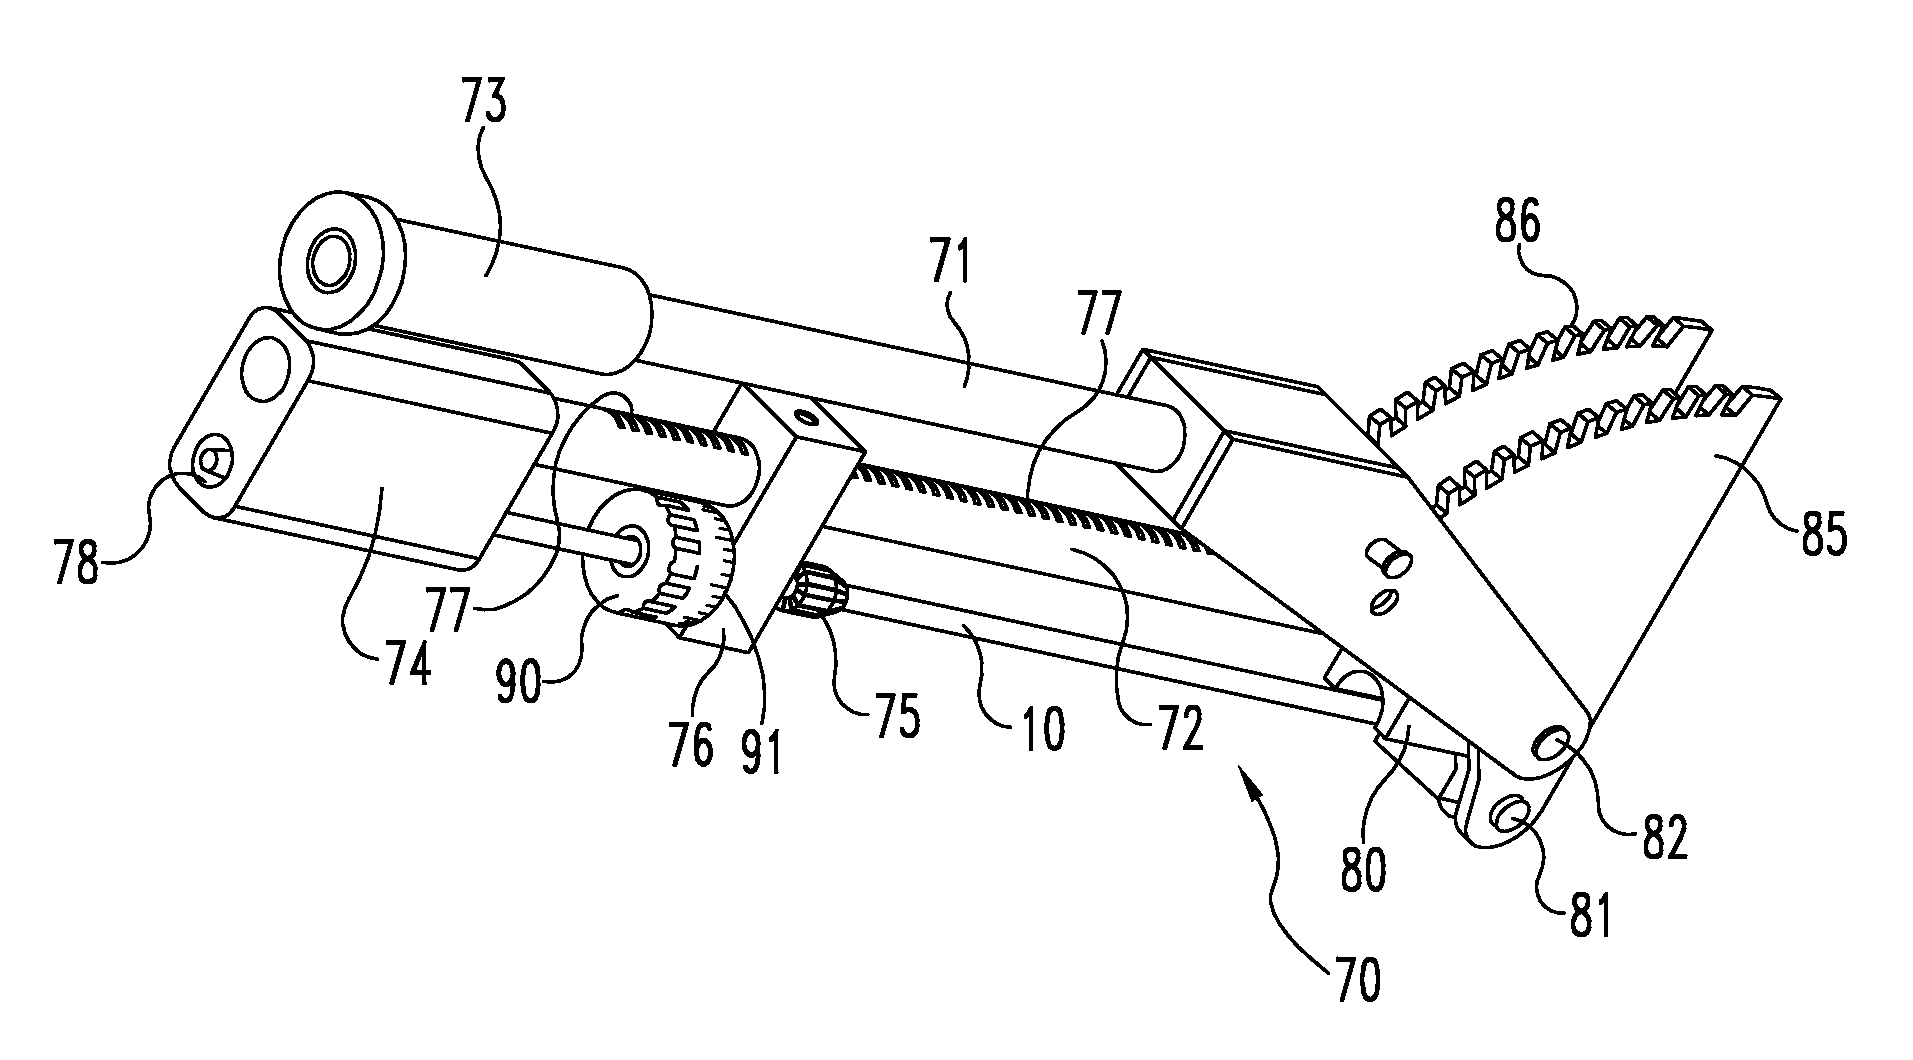 System and device for designing and forming a surgical implant